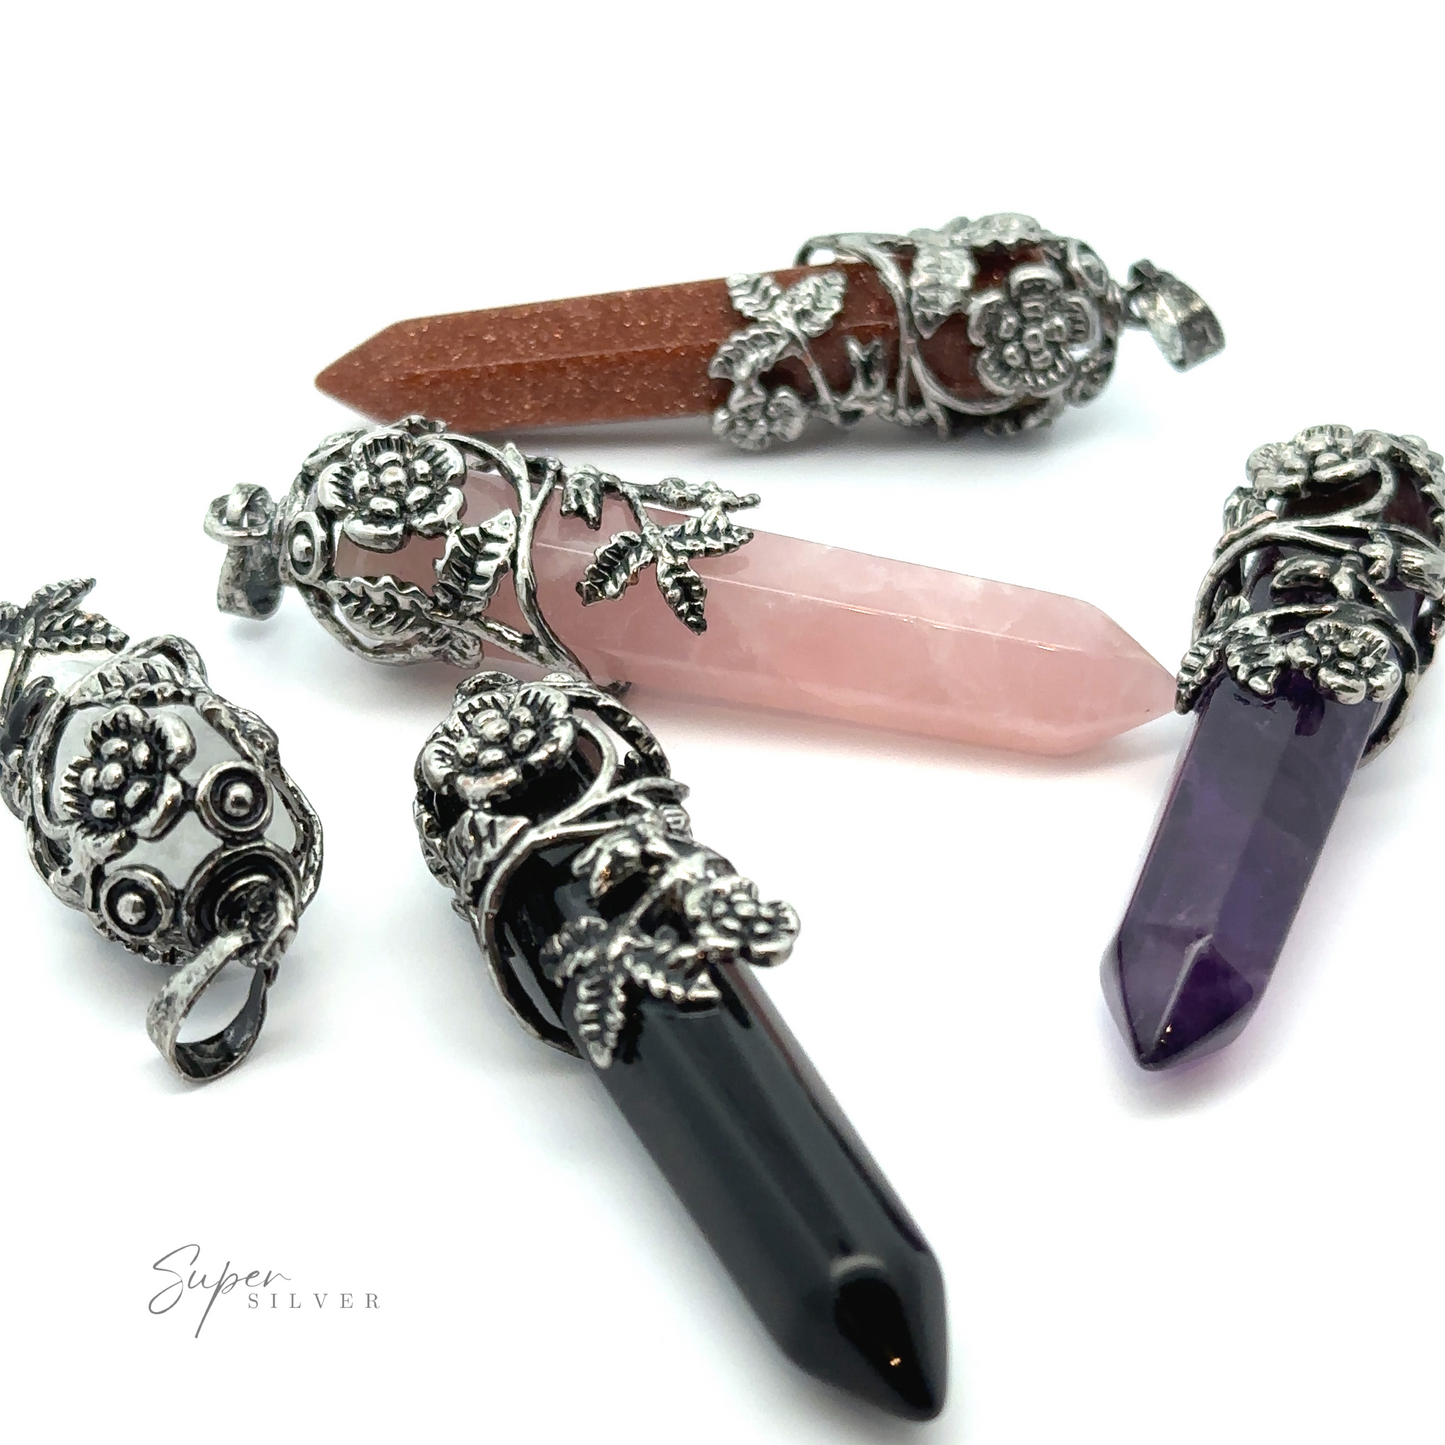 A set of five Silver-Plated Flower Design Stone Pendants with ornate silver caps featuring floral designs. The gemstones include rose quartz, amethyst, black onyx, and goldstone. The background is white.